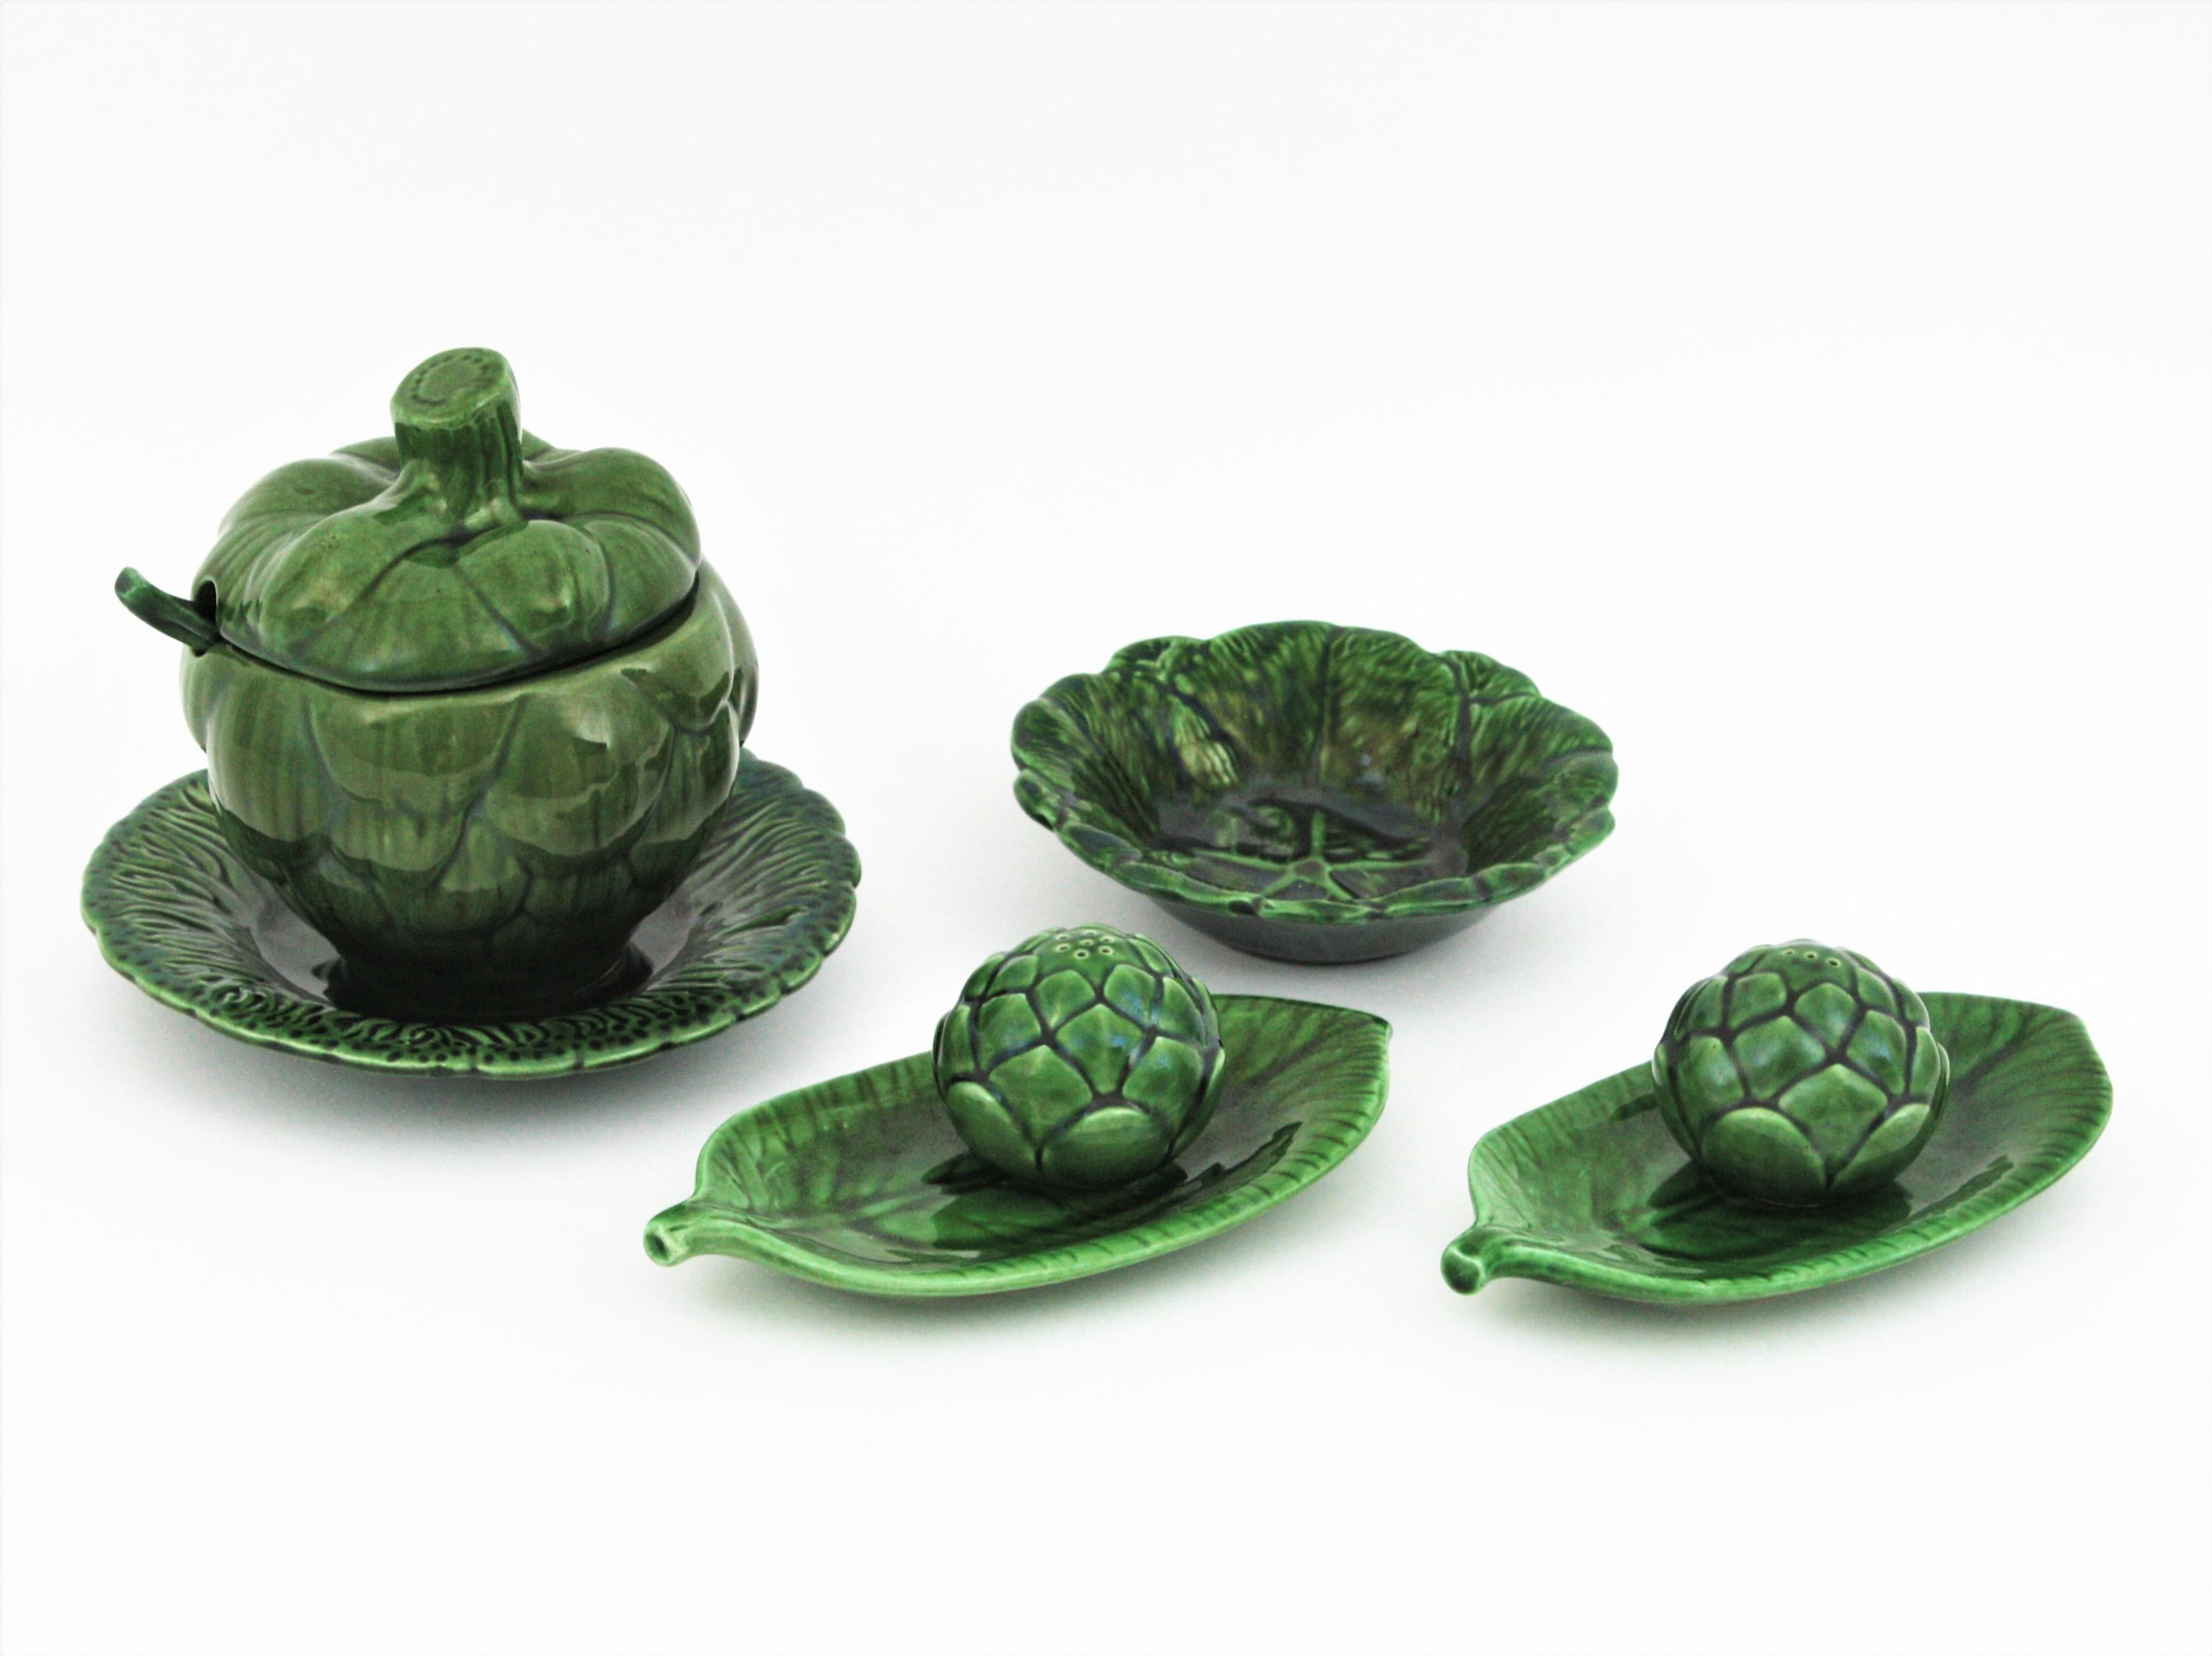 Beautiful artichoke and leaves 8 pieces crockery /tableware / serveware set. Spain, 1960s
This serving set is made in dark green glazed ceramic and it is comprised by: 
1 artichoke sugar bowl / sauce tureen with lid+ 1 small serving spoon+ 1 small